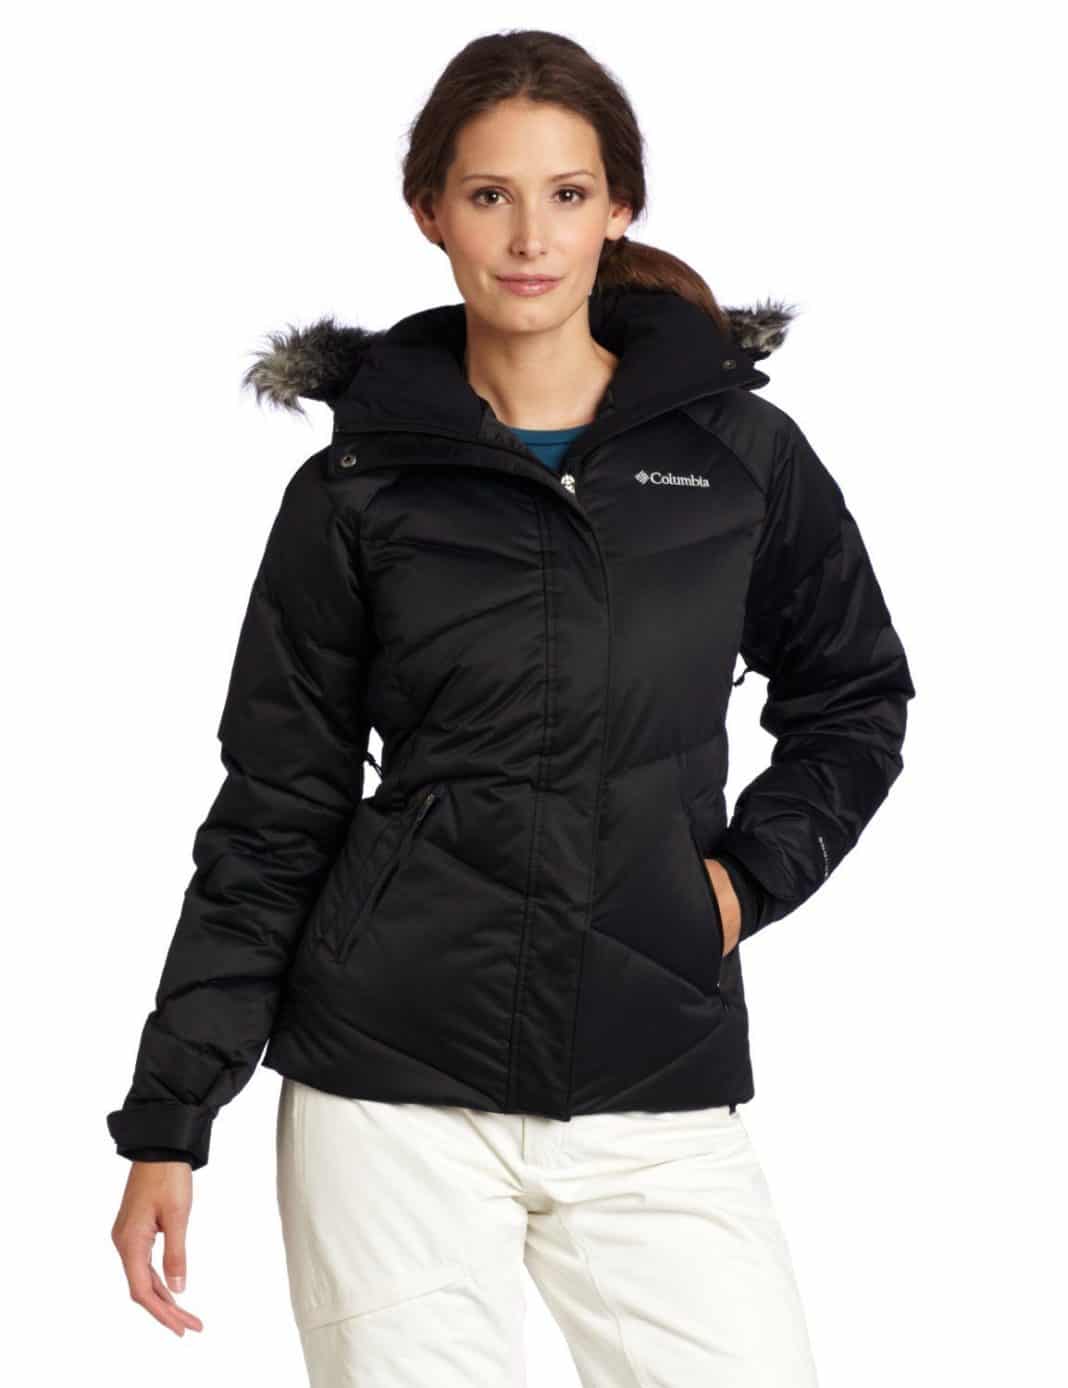 best down jackets for women - Columbia